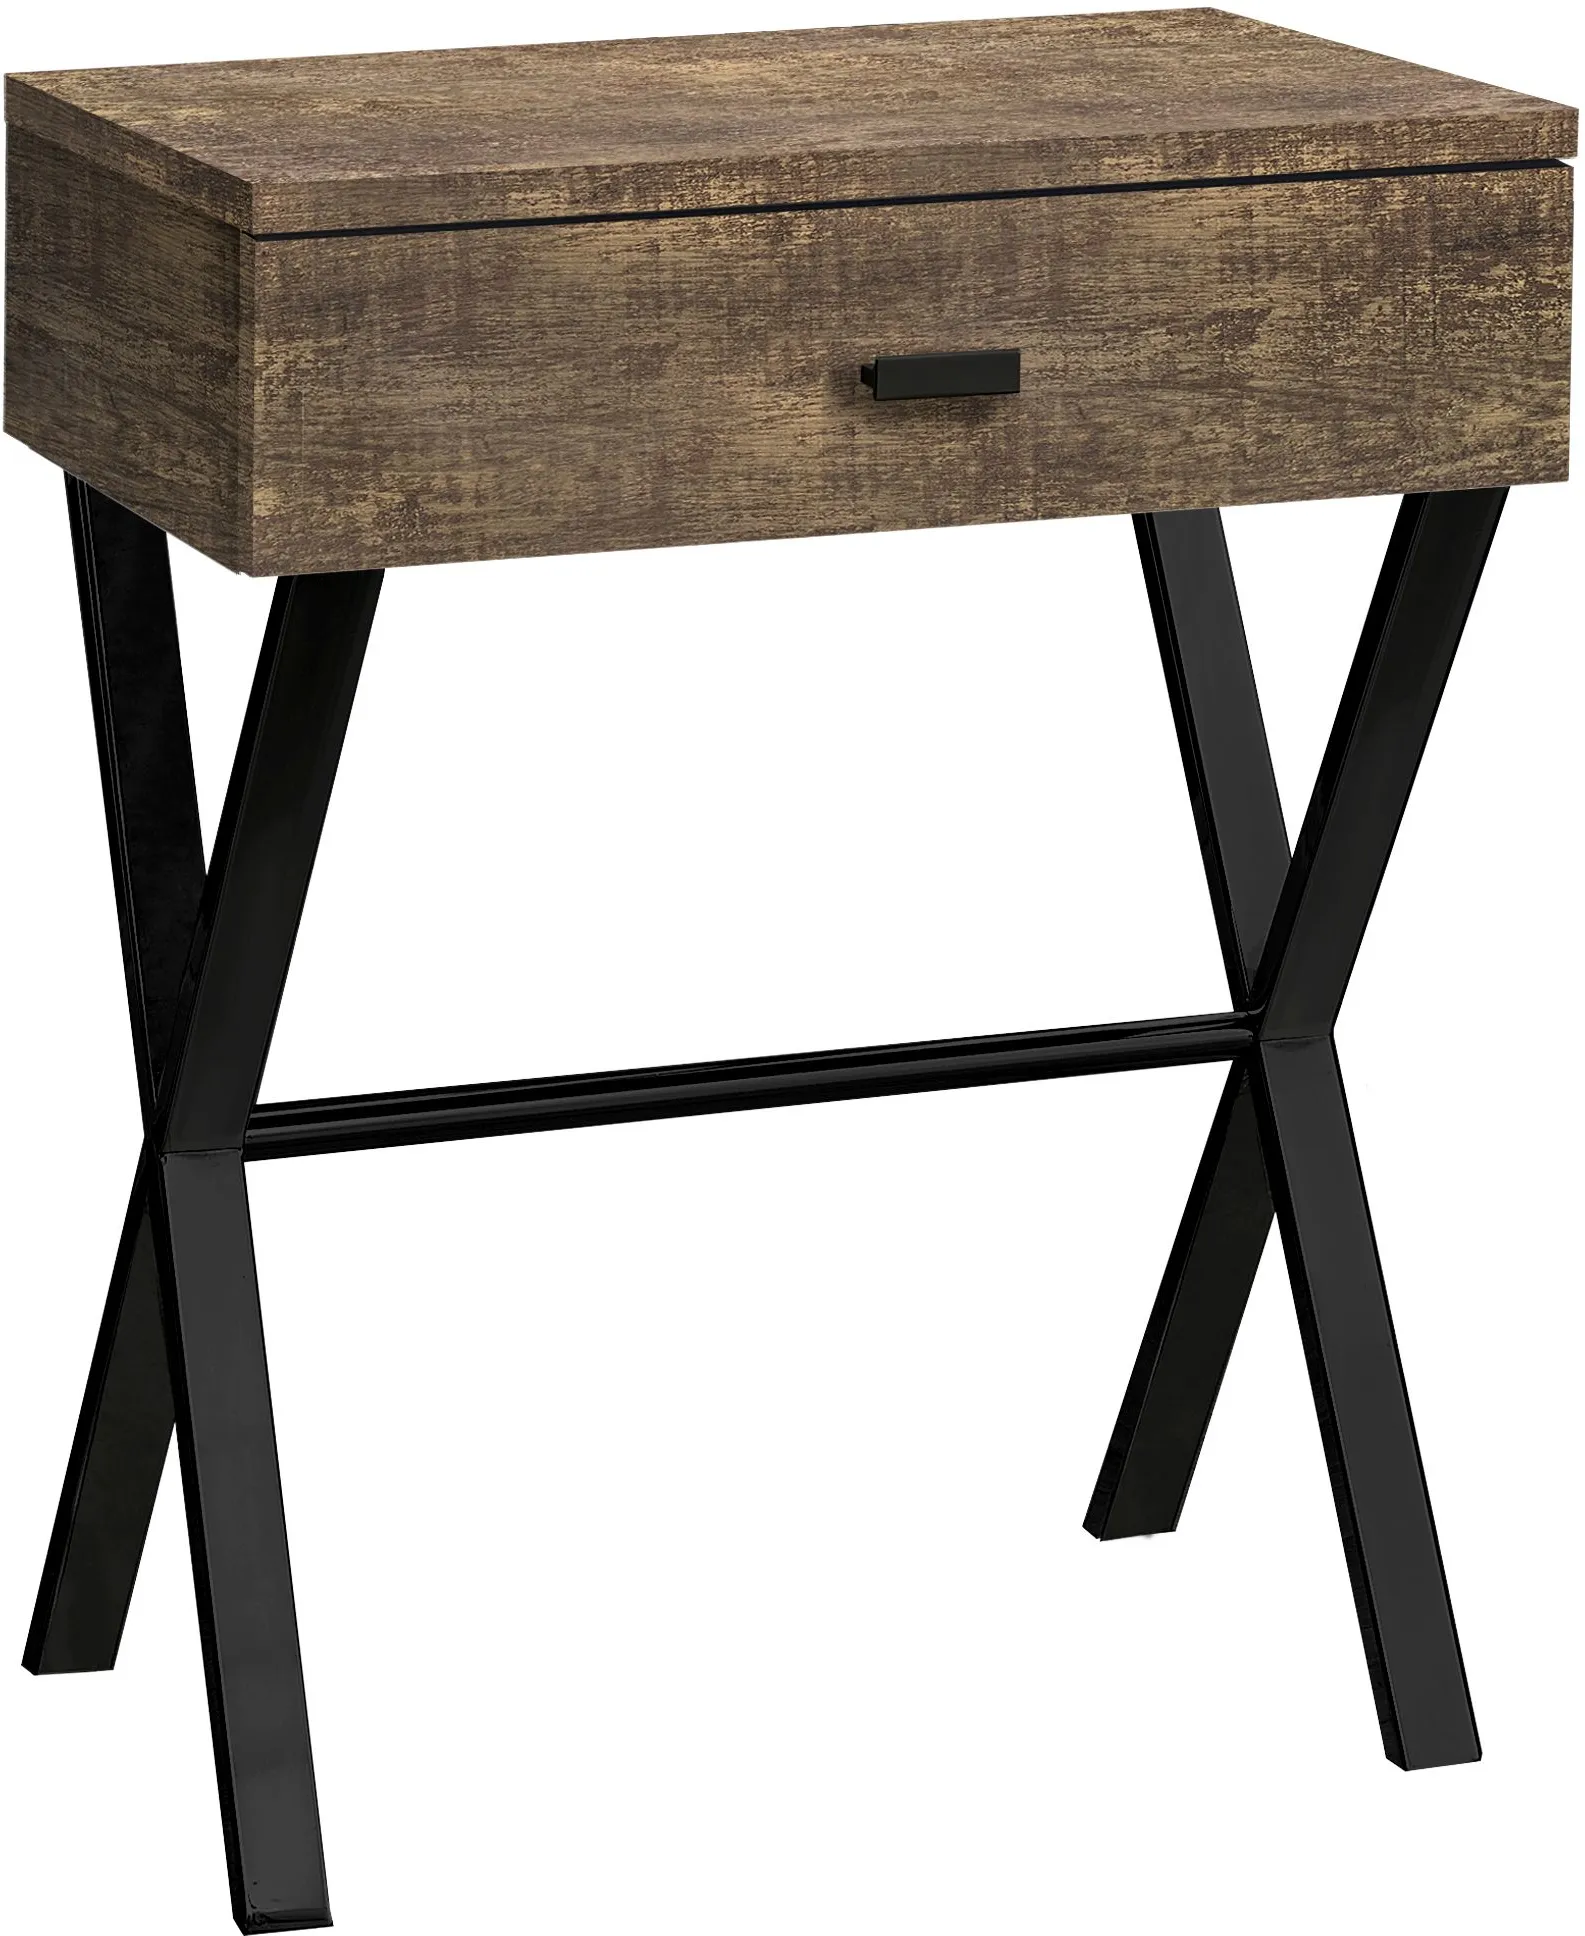 Accent Table, Side, End, Nightstand, Lamp, Storage Drawer, Living Room, Bedroom, Metal, Laminate, Brown, Black, Contemporary, Modern